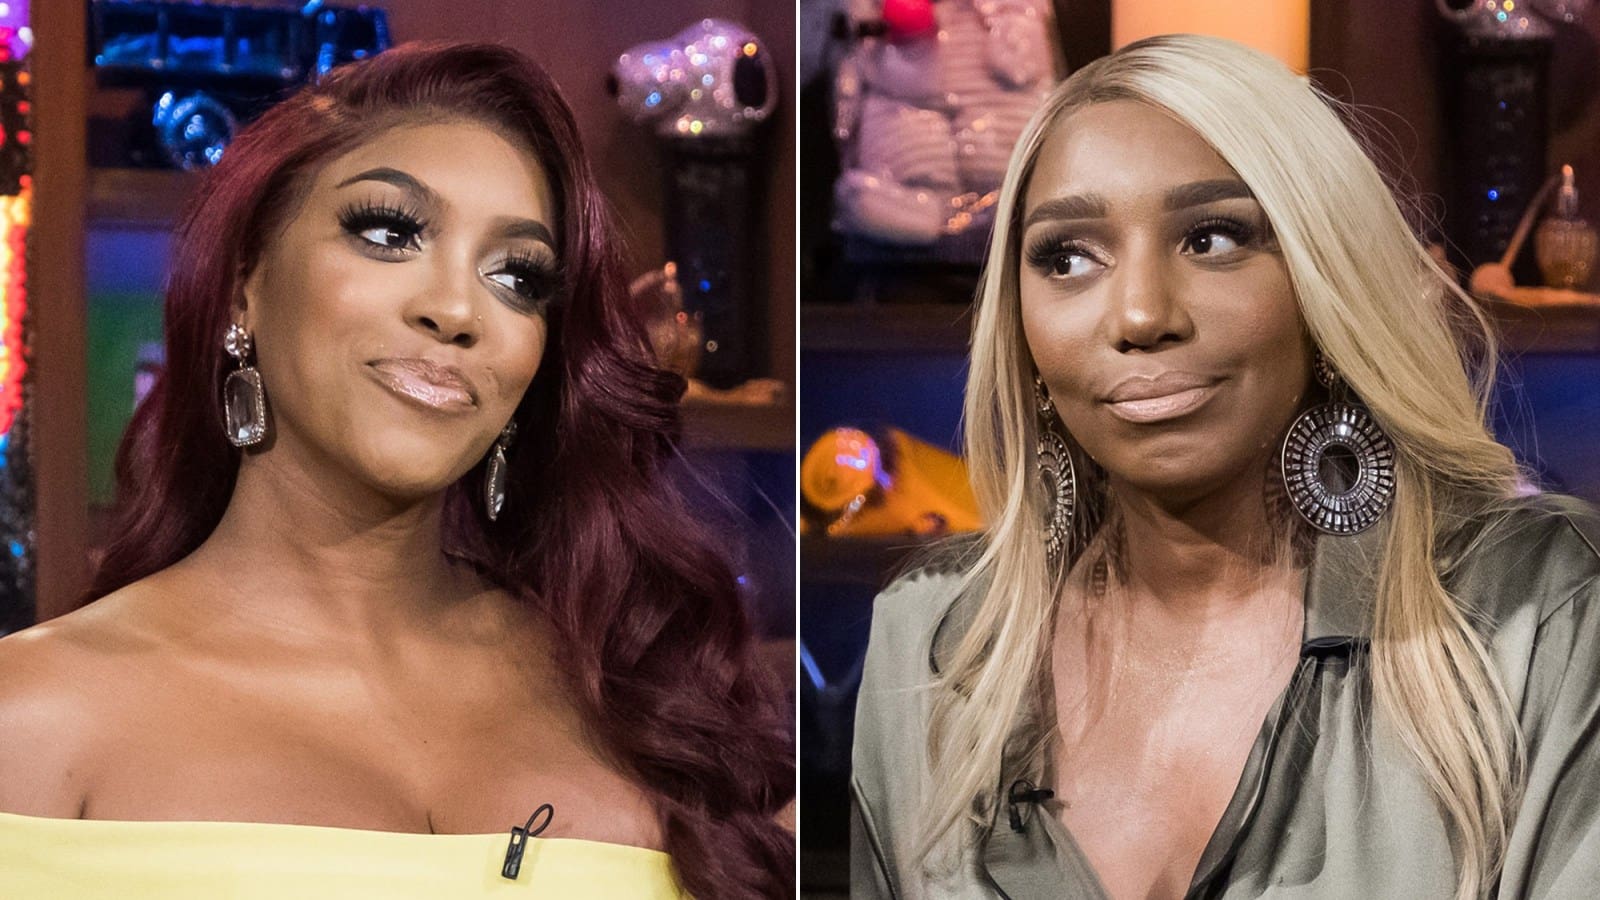 NeNe Leakes Hangs Out With NeNe Leakes After Spending Time With Porsha Williams